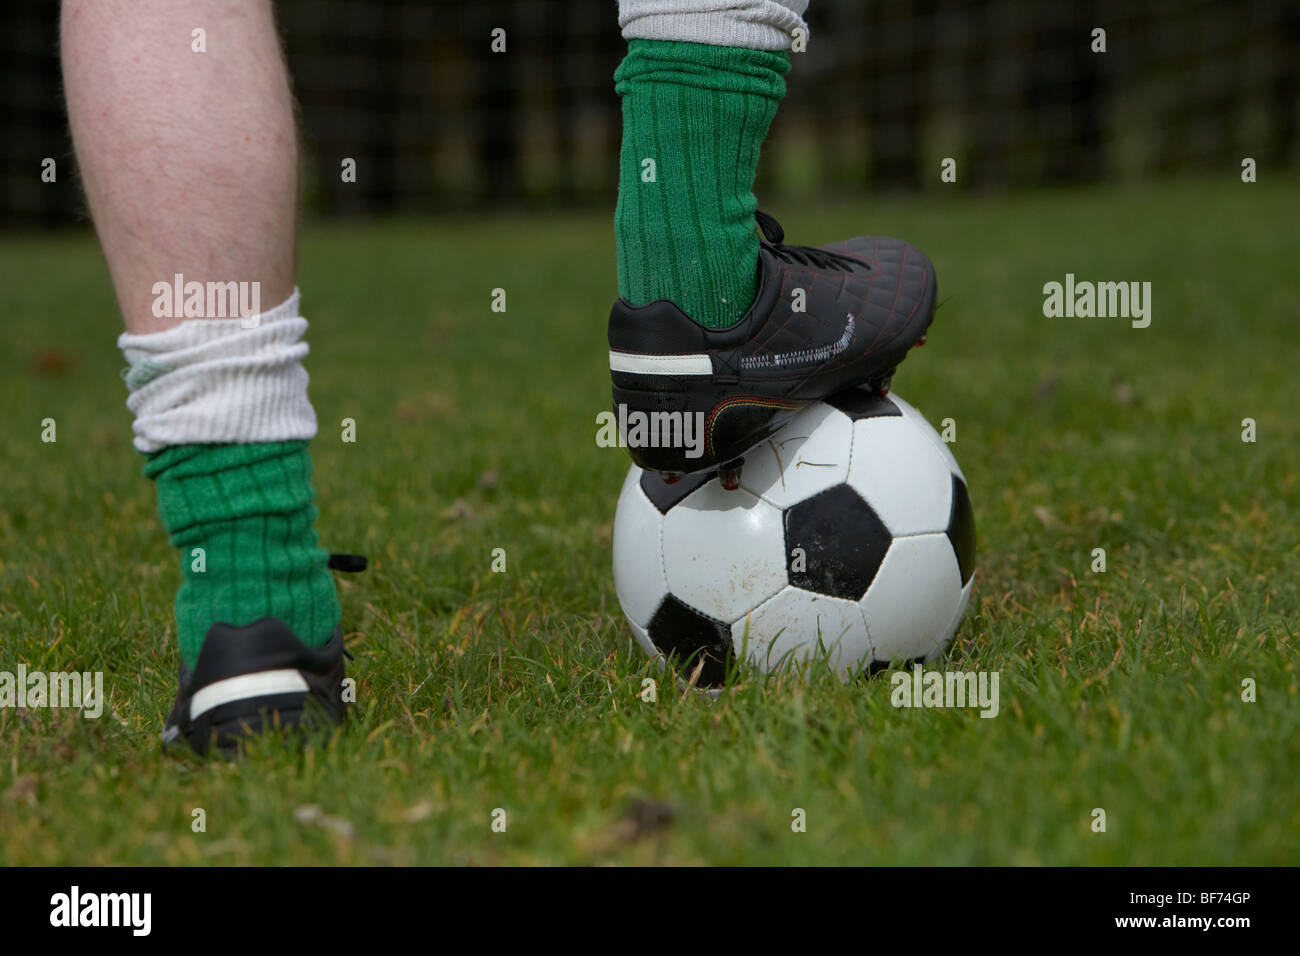 soccer football player with foot on the ball ready to take a kick Stock Photo